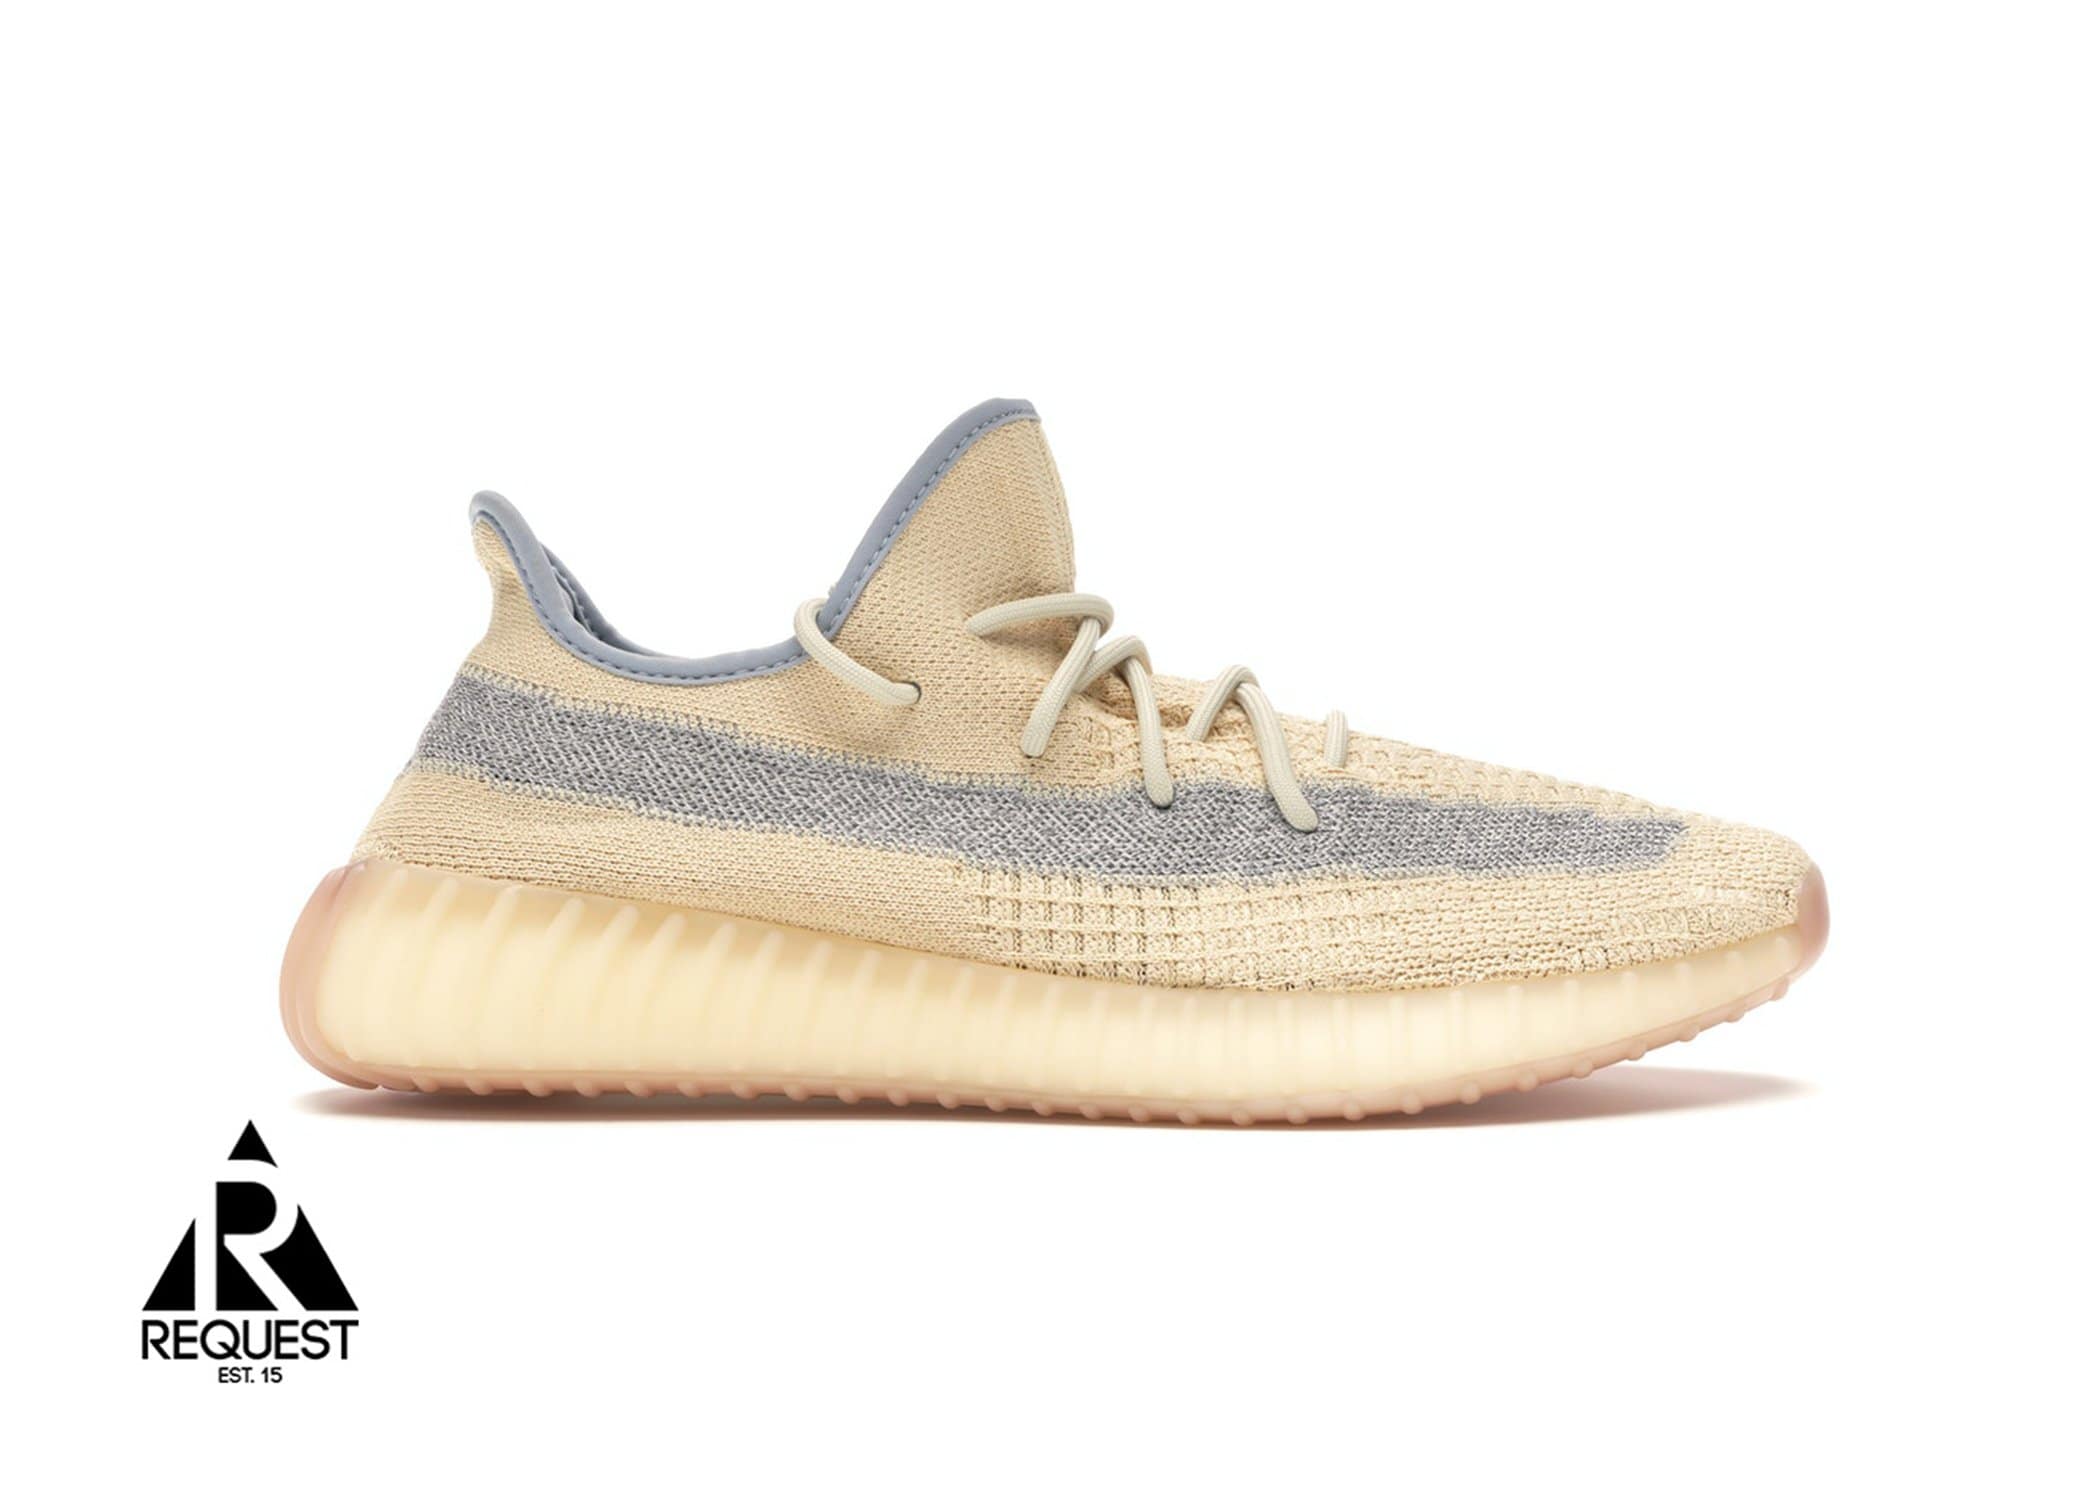 Catedral Empuje harina Adidas Yeezy Boost 350 V2 “Bone” | Request